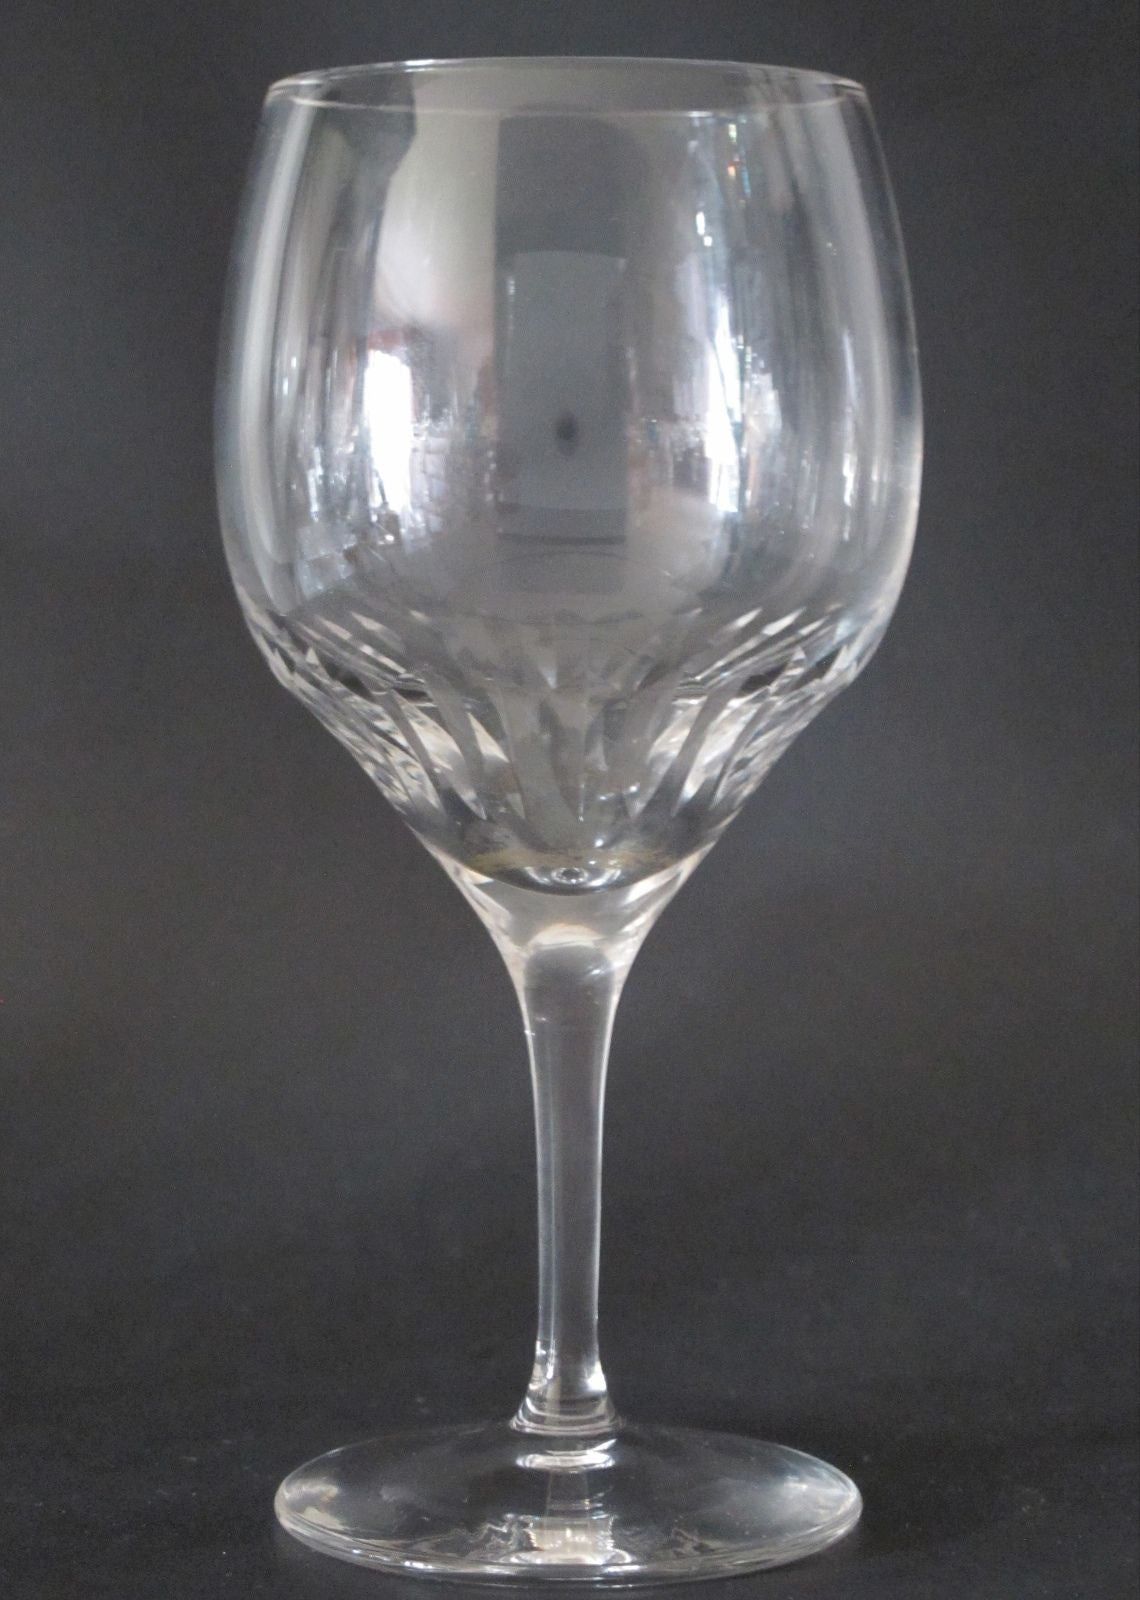 Lenox  Cut glass Radiance wine Crystal  Made in USA Mt Pleasant PA  mouth blown - O'Rourke crystal awards & gifts abp cut glass